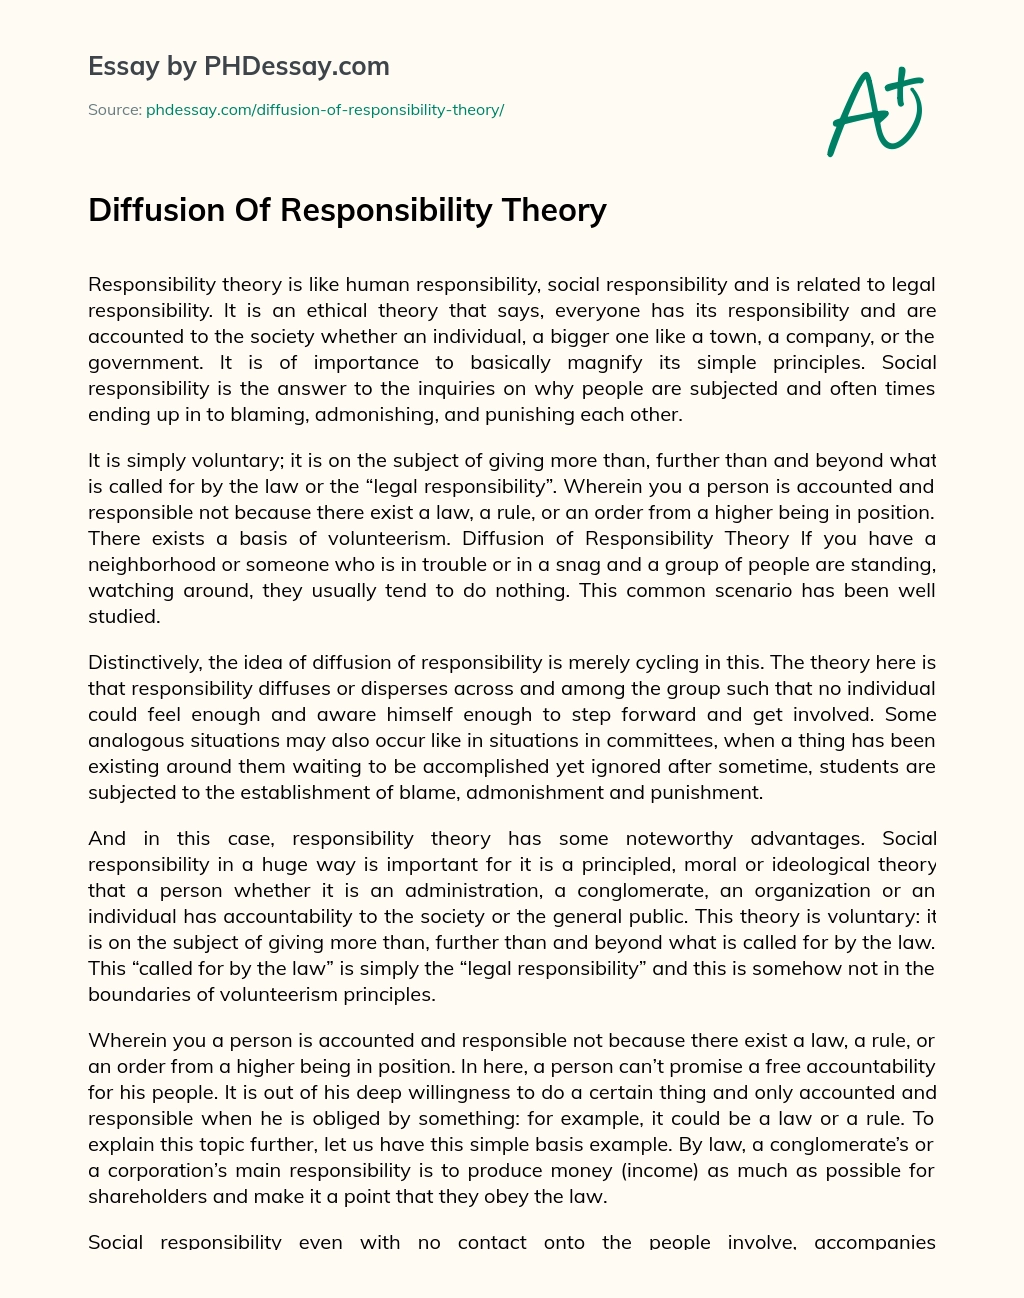 Diffusion Of Responsibility Theory essay